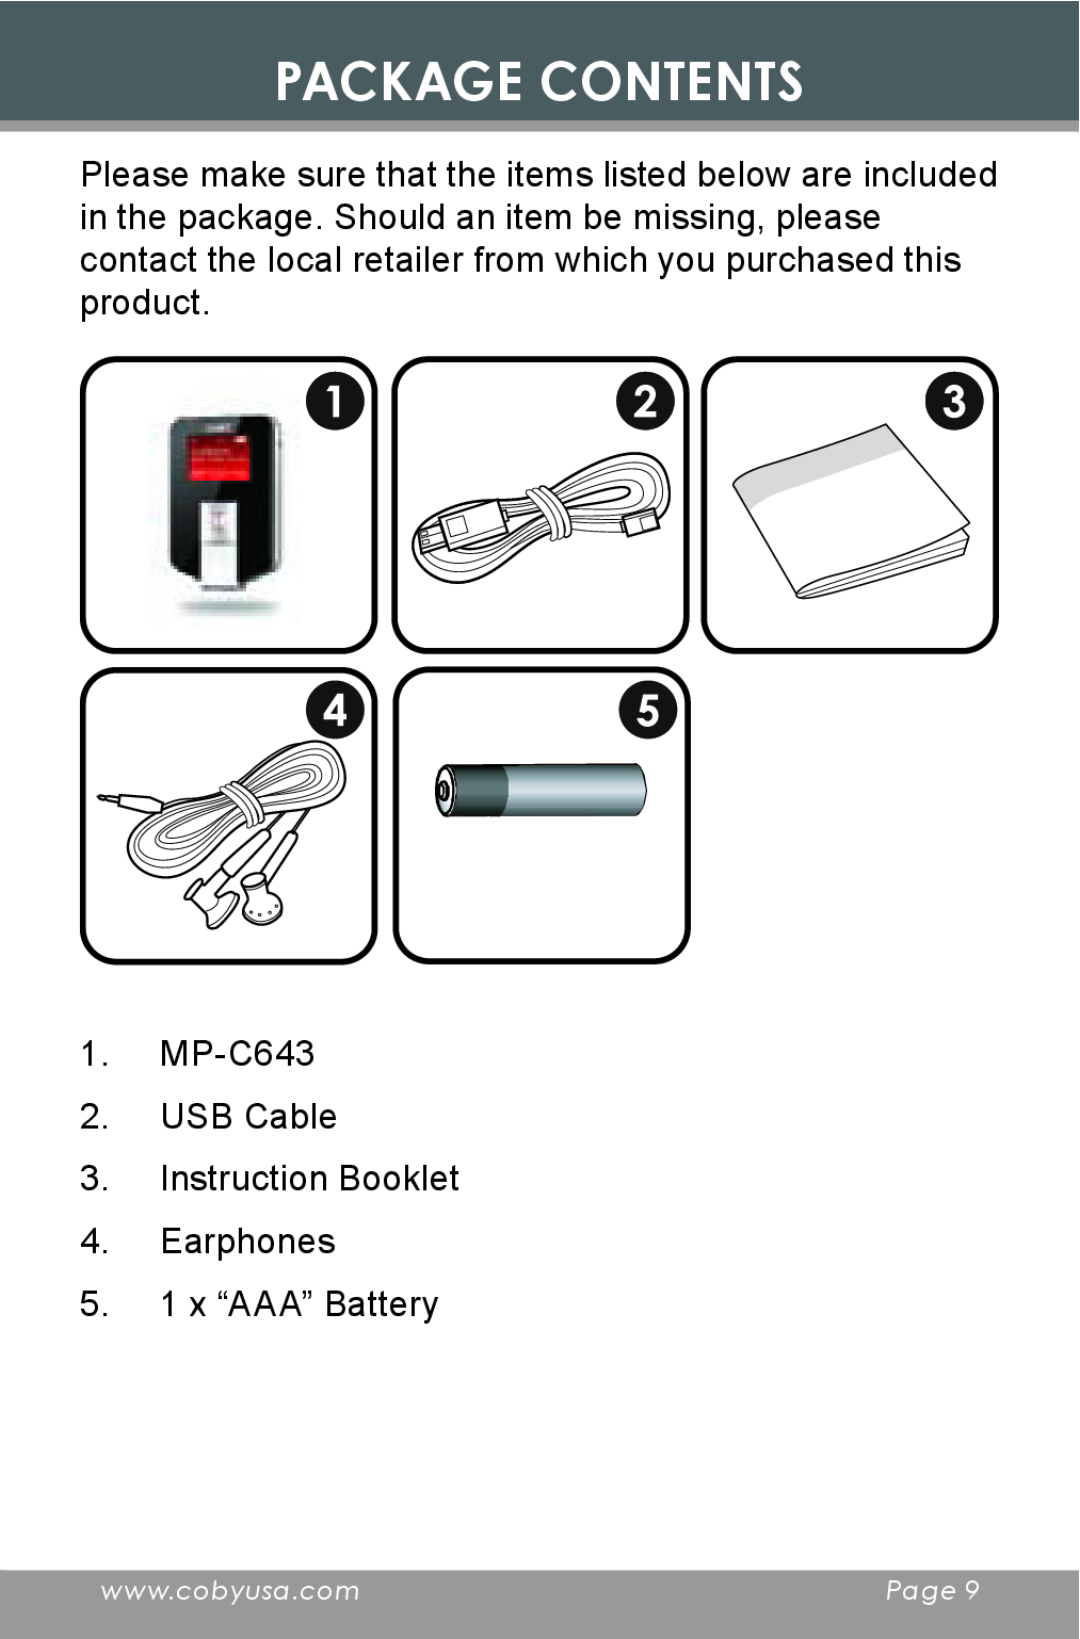 COBY electronic Package Contents, MP-C643 2. USB Cable 3. Instruction Booklet 4. Earphones, 5. 1 x “AAA” Battery 